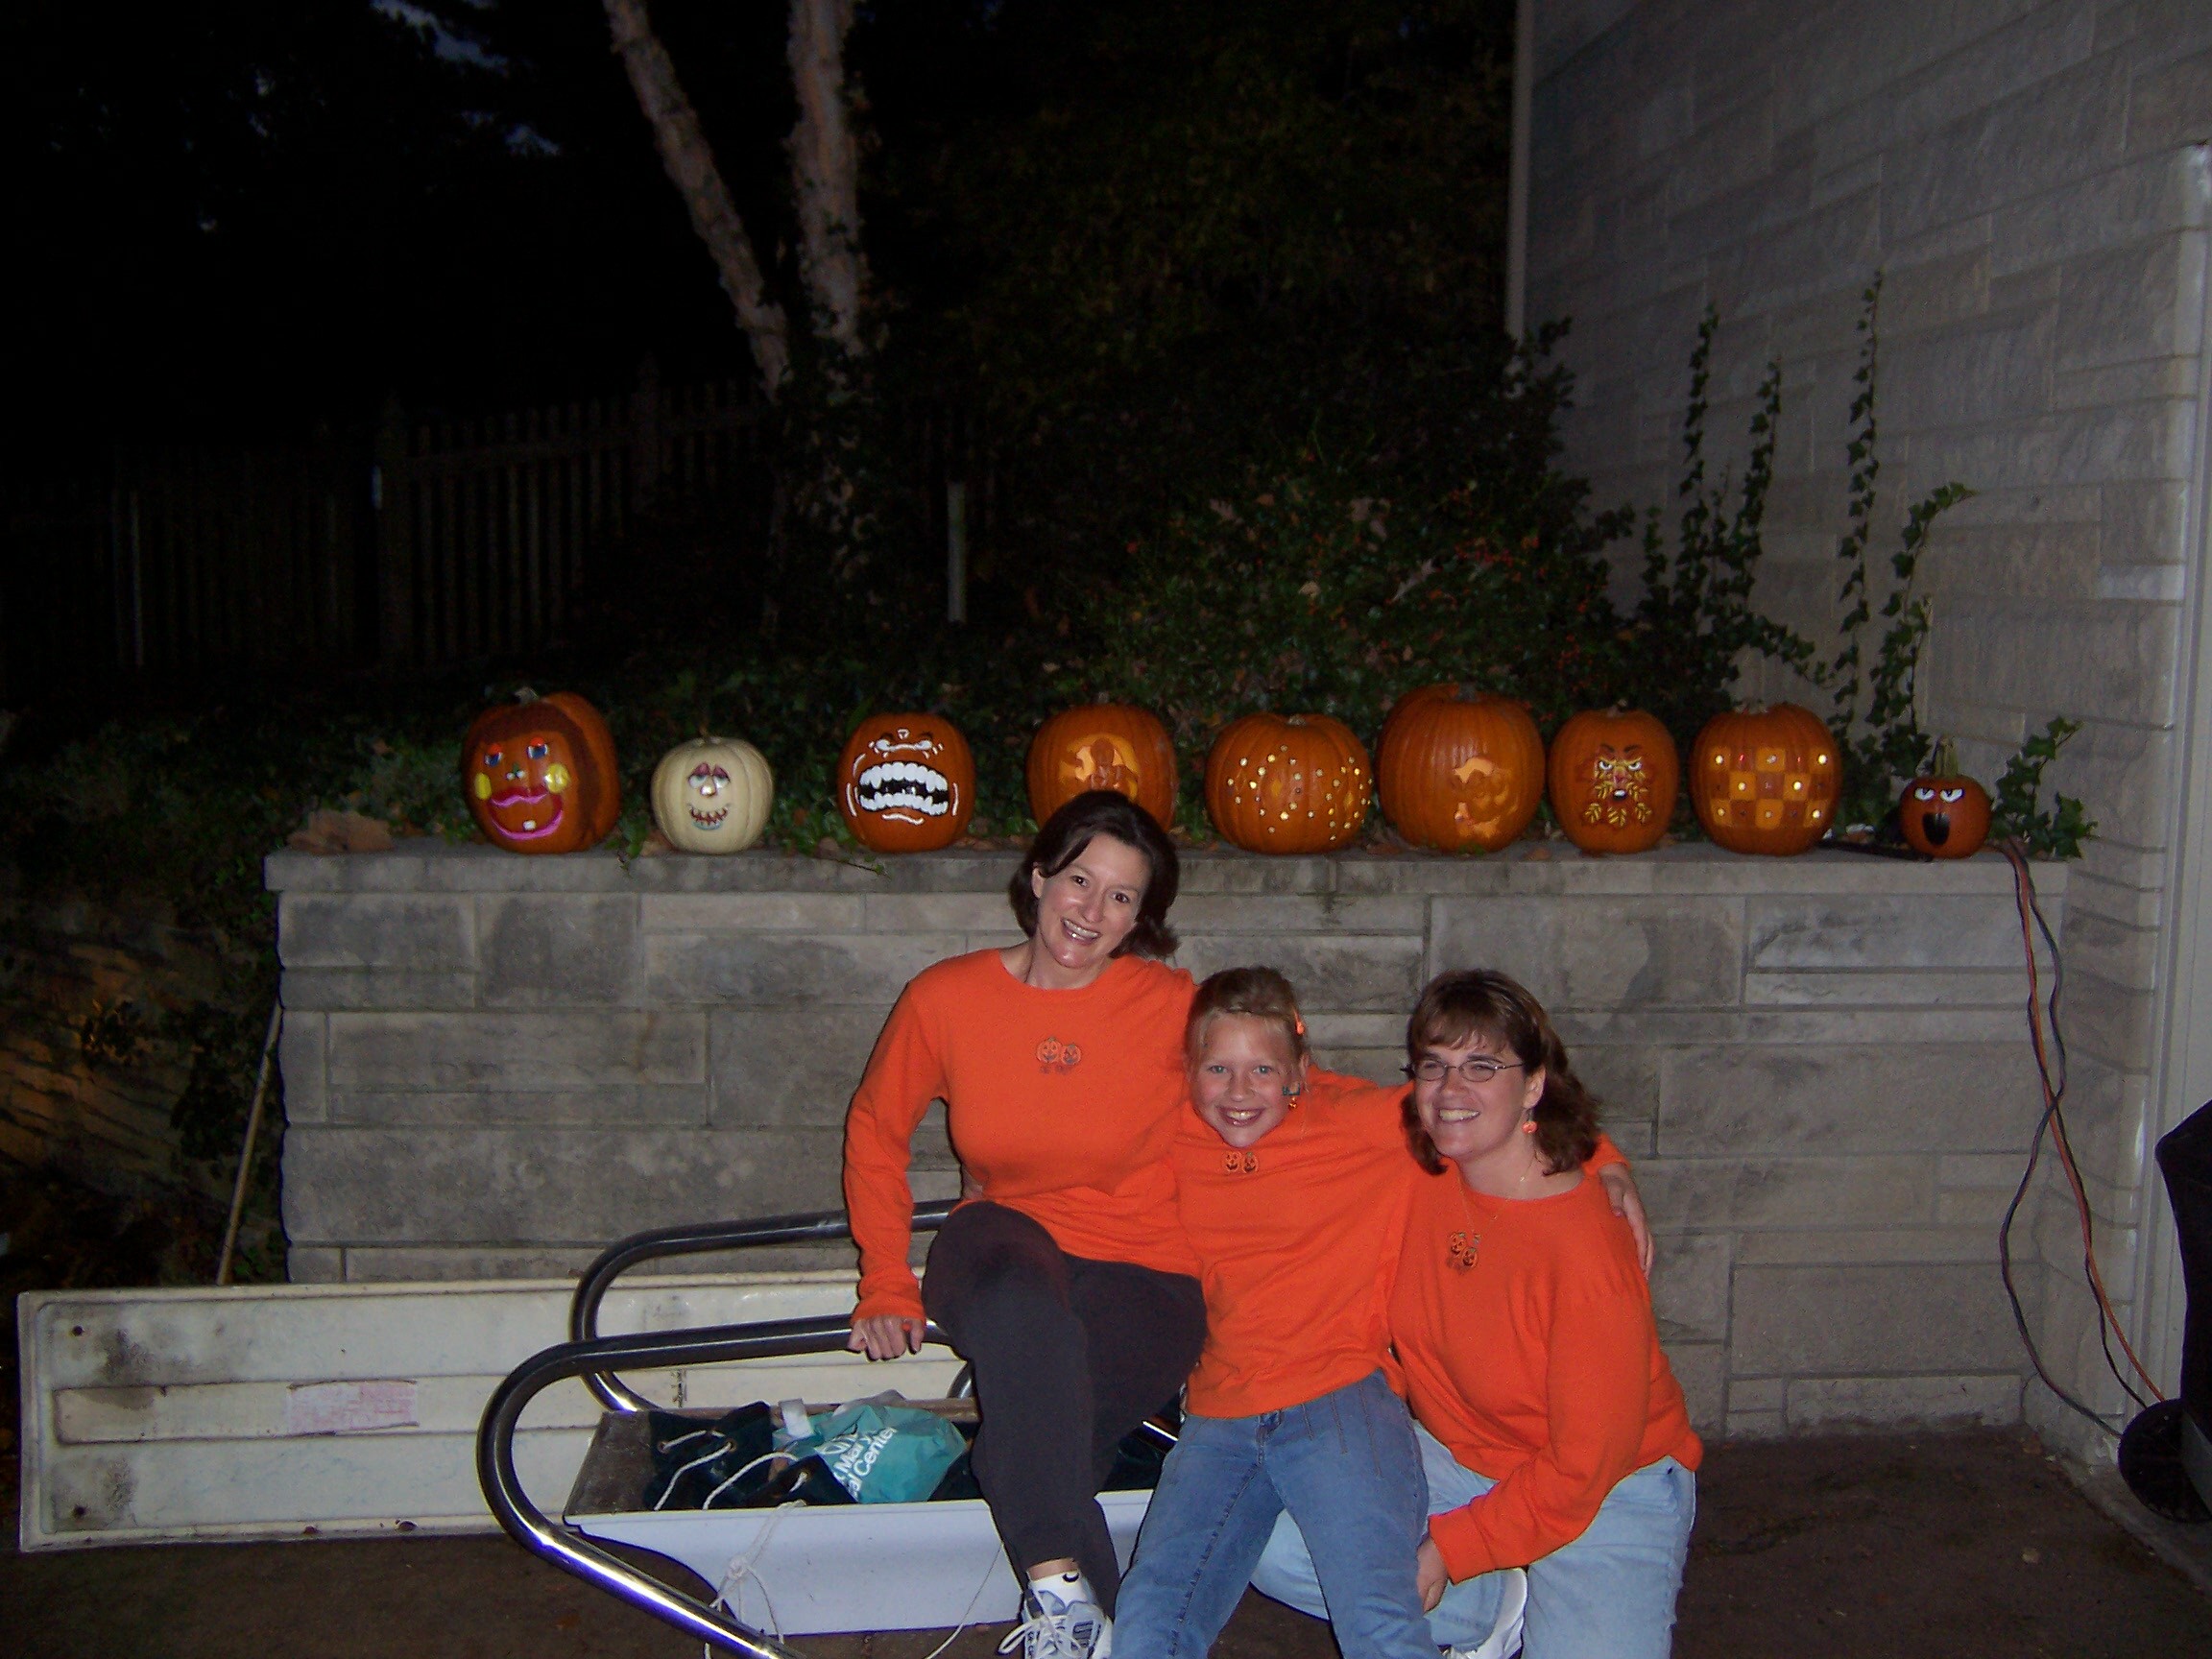 Sandy, her daughter Courtney, and her friend Donna with painted pumkins